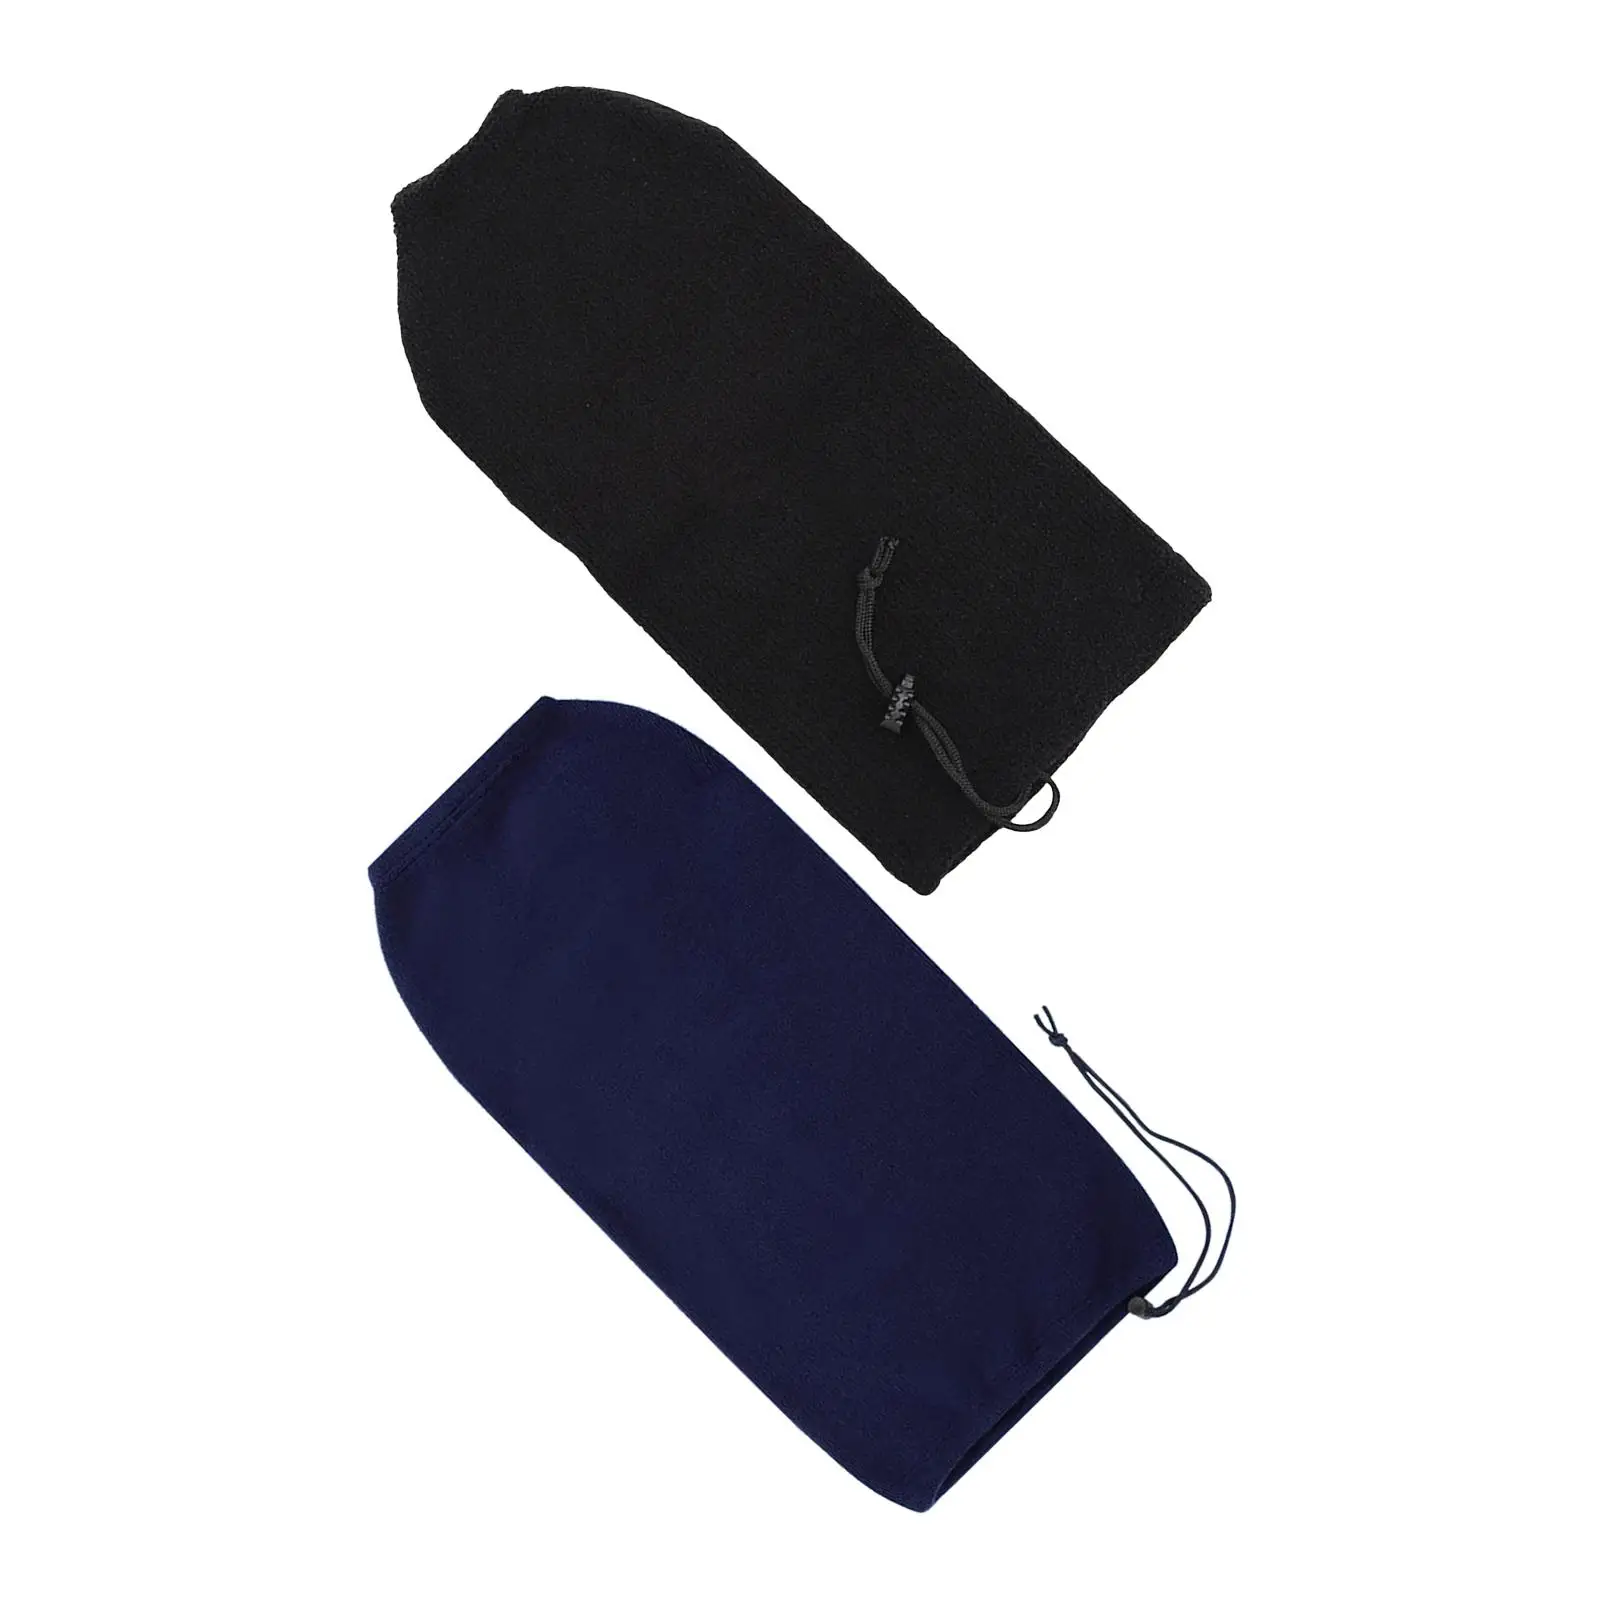 Boat Cover Protective Sleeve, with Tighten Drawstring, Easy to Use Accessories Protector Marine Cover for Marine Sailing